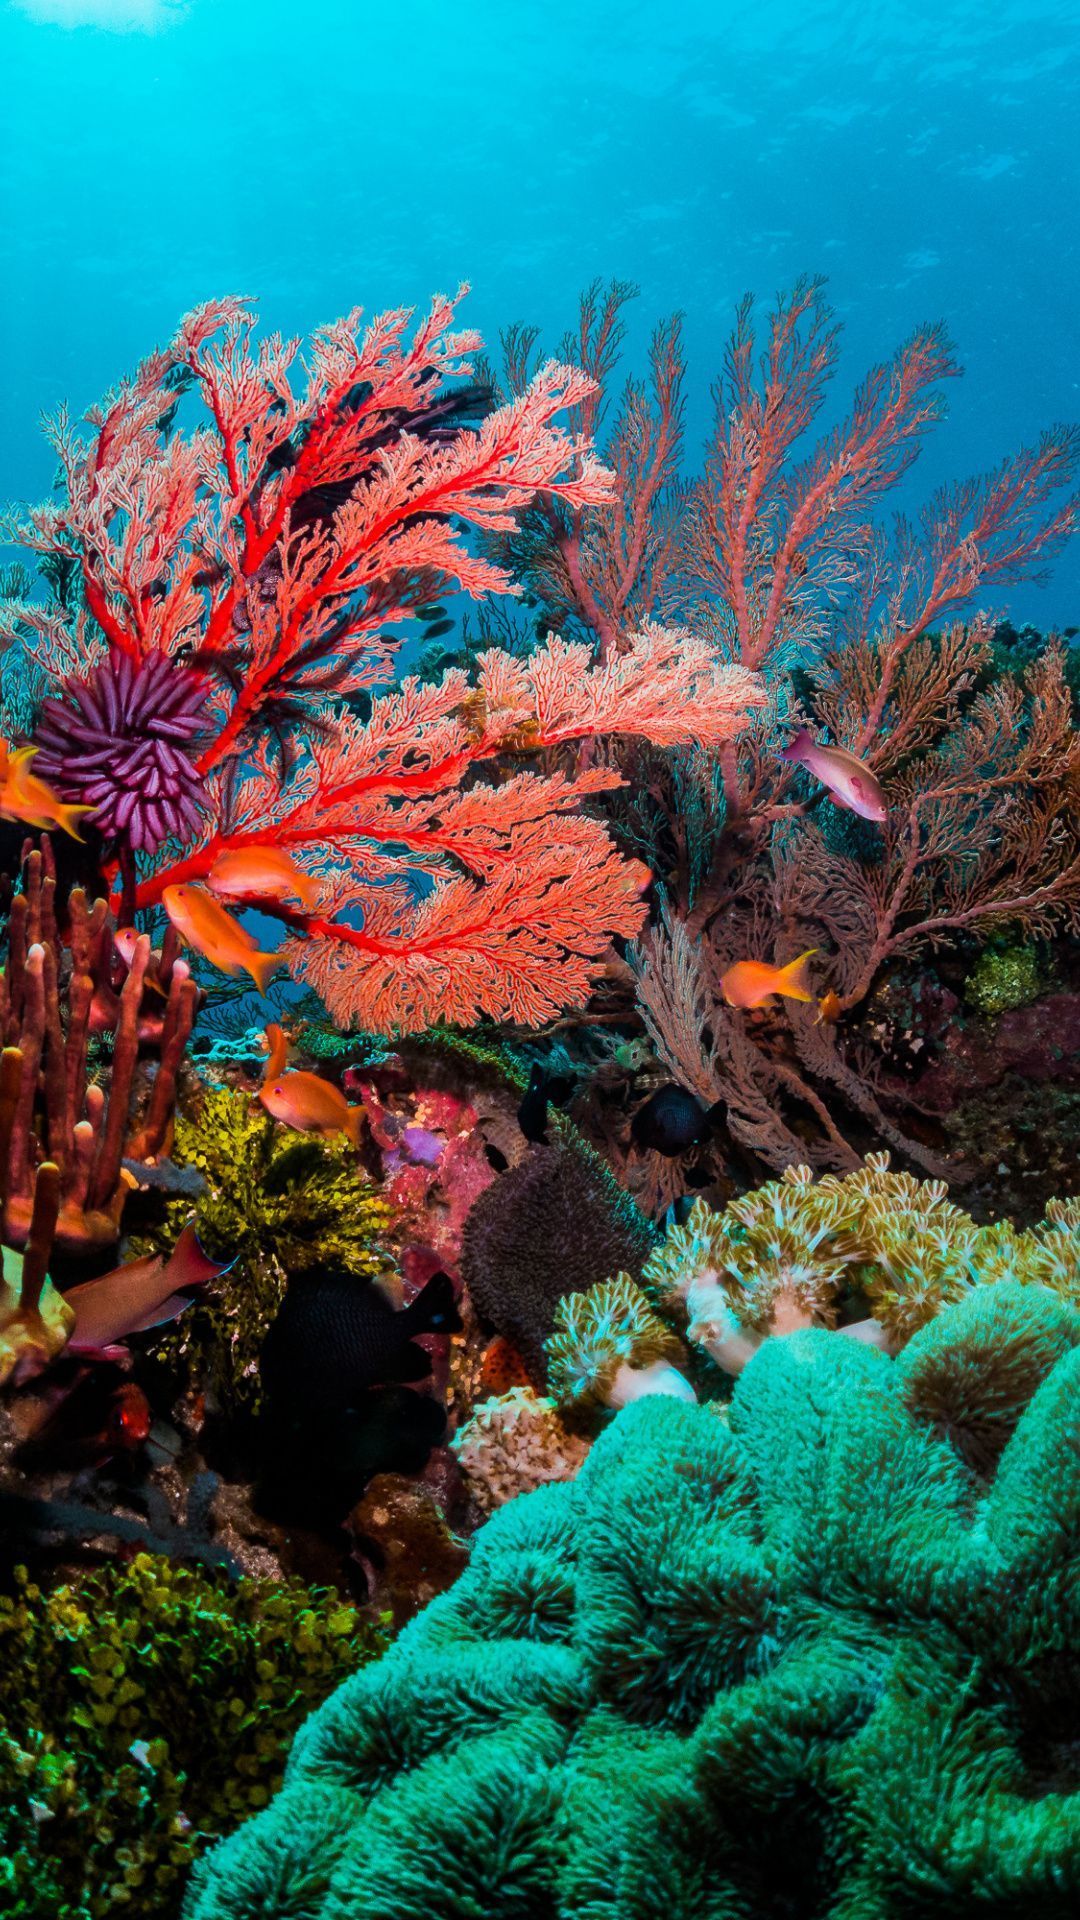 Colorful Coral Wallpaper Download. Coral wallpaper, Coral reef photography, Sea life art